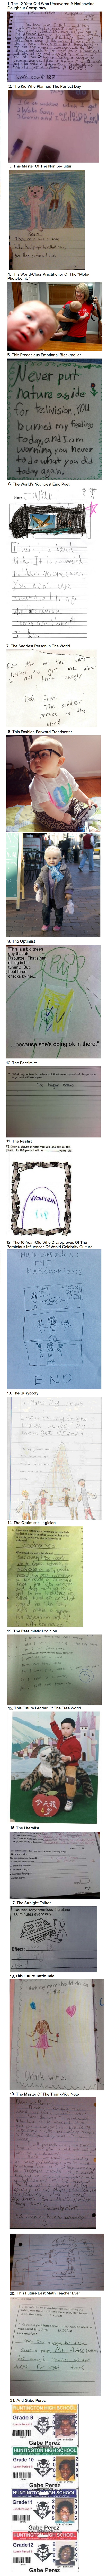 21 kids who are way too clever for their own good